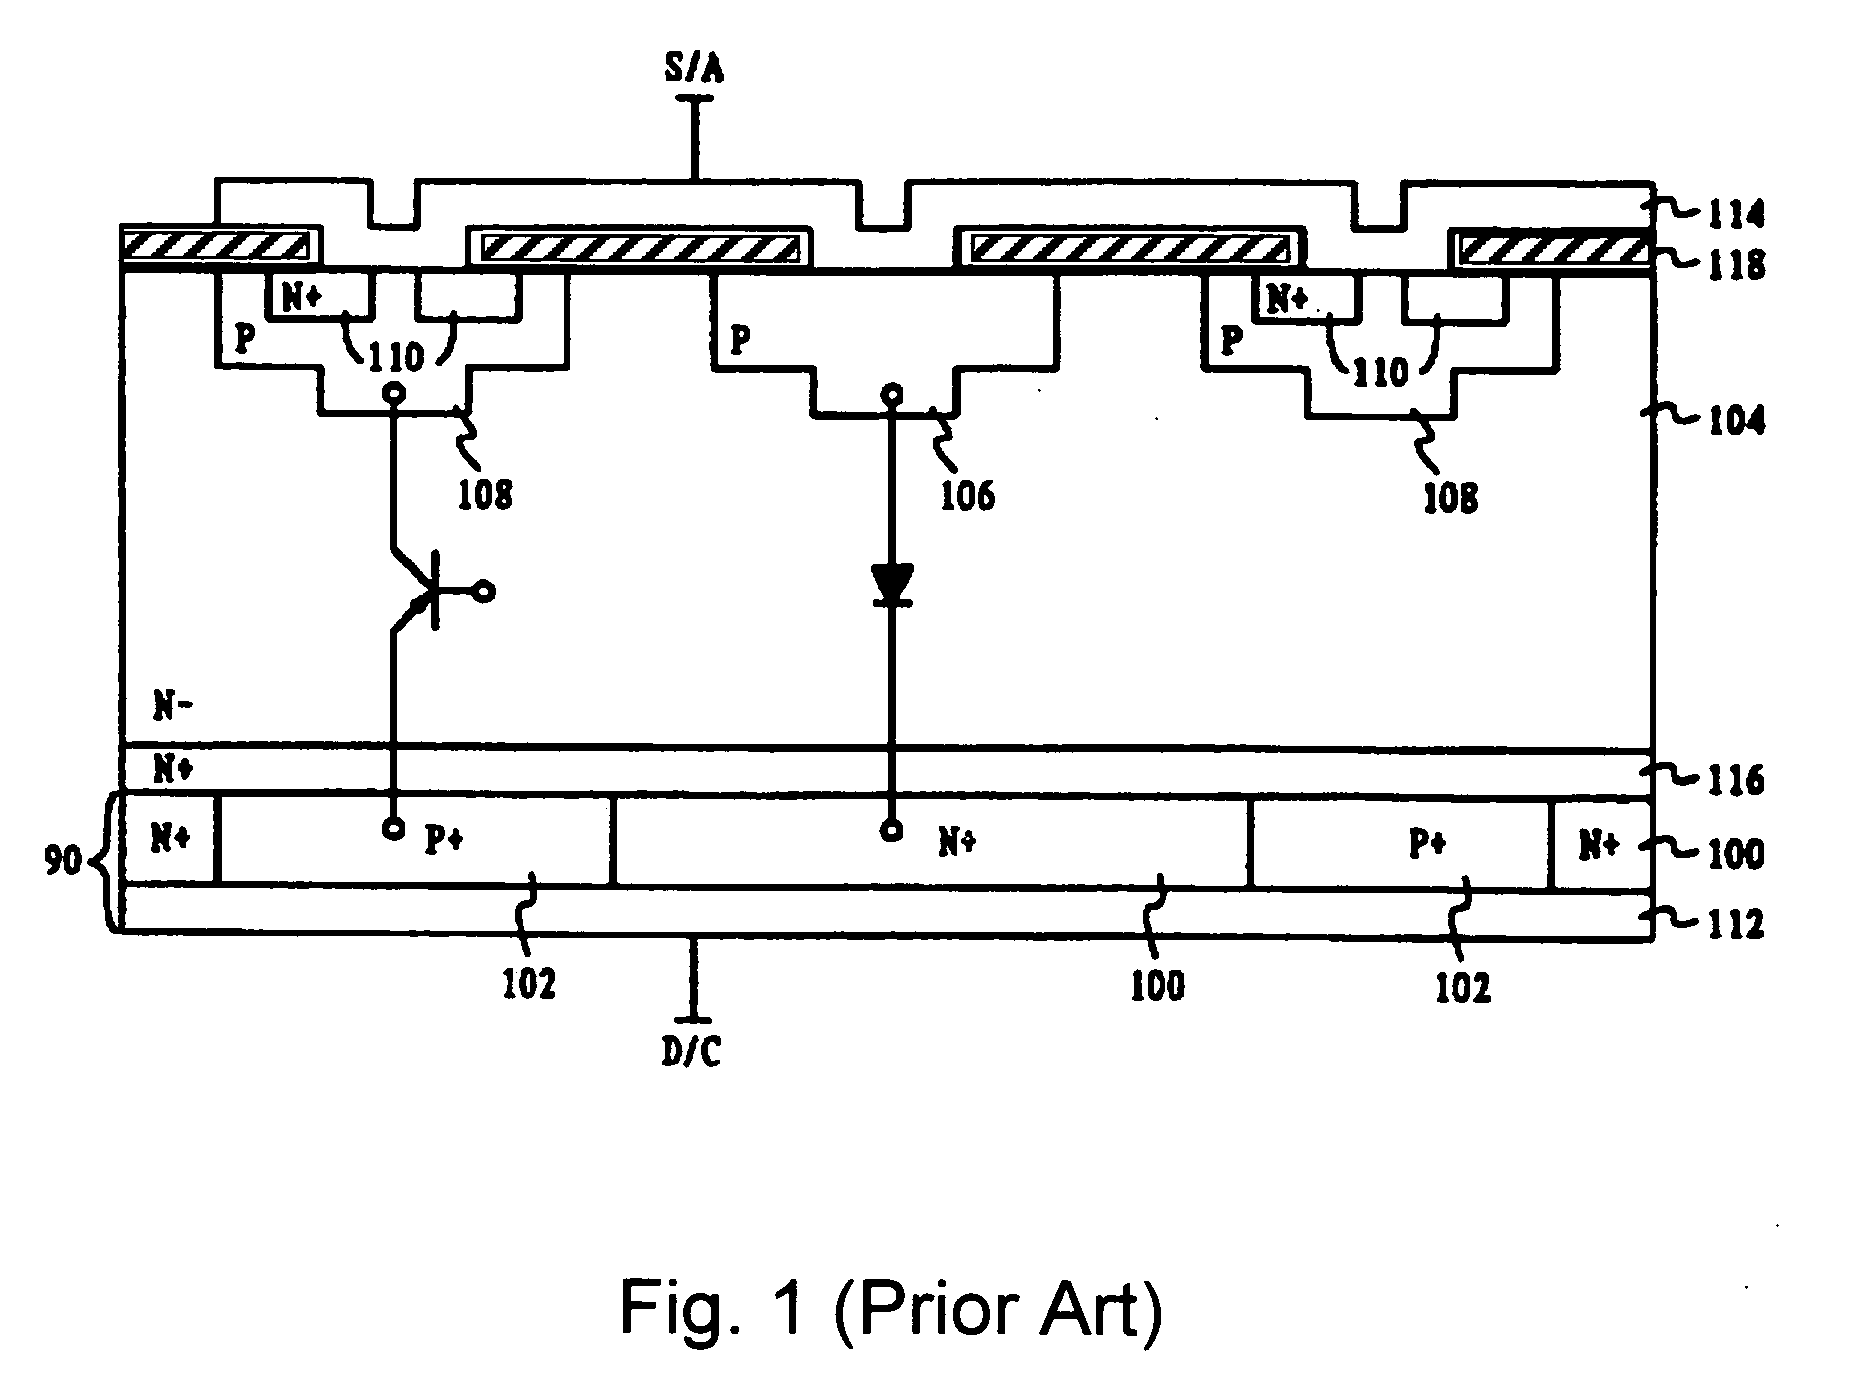 Insulated gate bipolar transistor (IGBT) with monolithic deep body clamp diode to prevent latch-up